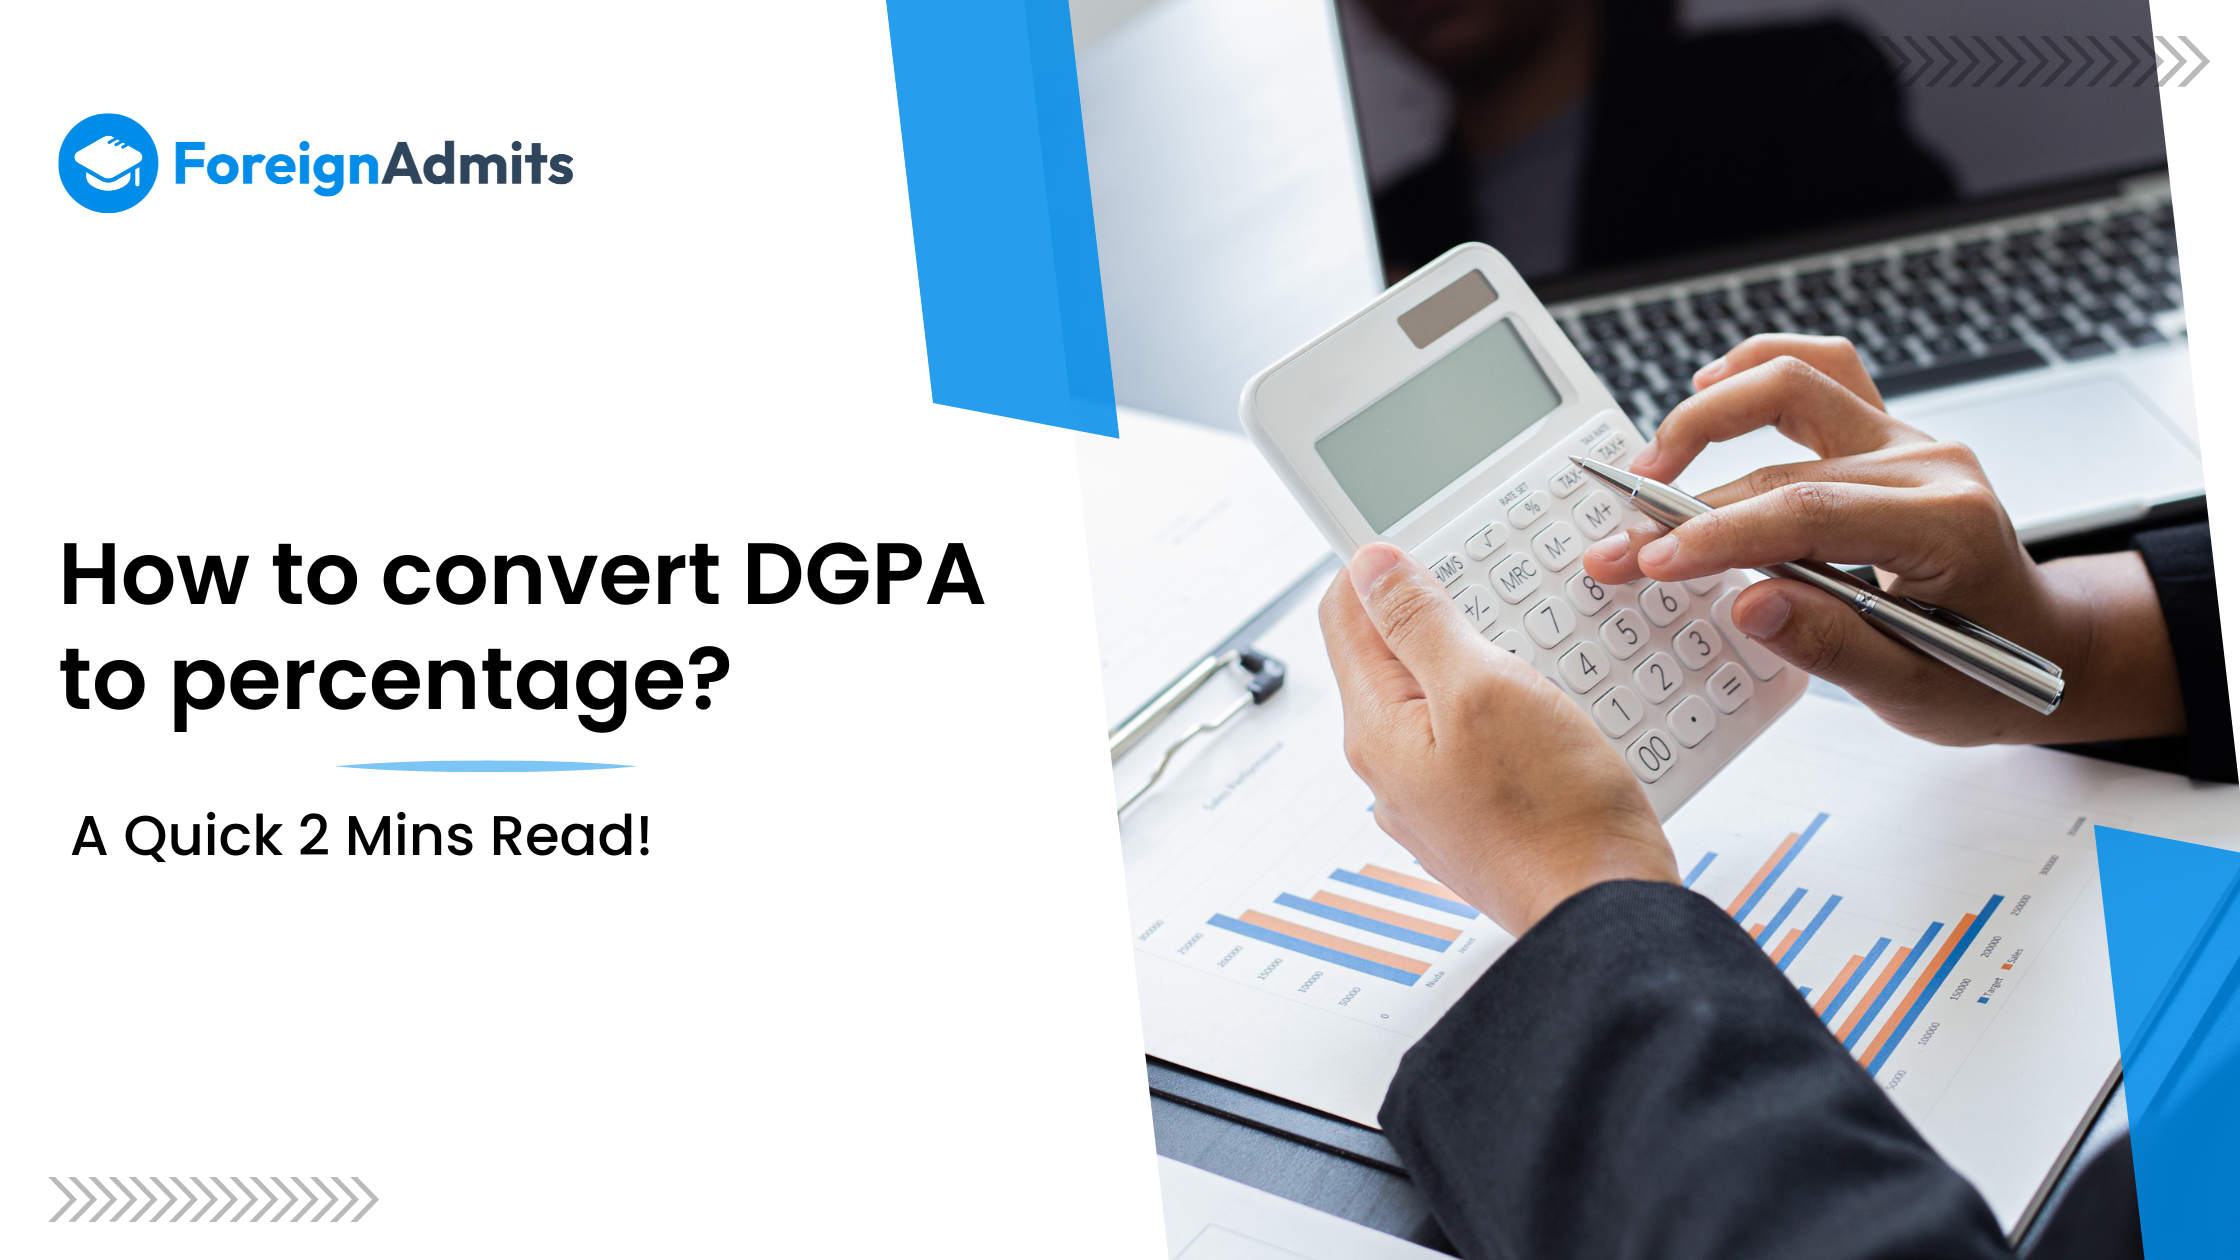 How to Convert DGPA to Percentage a Quick 2 Min Read